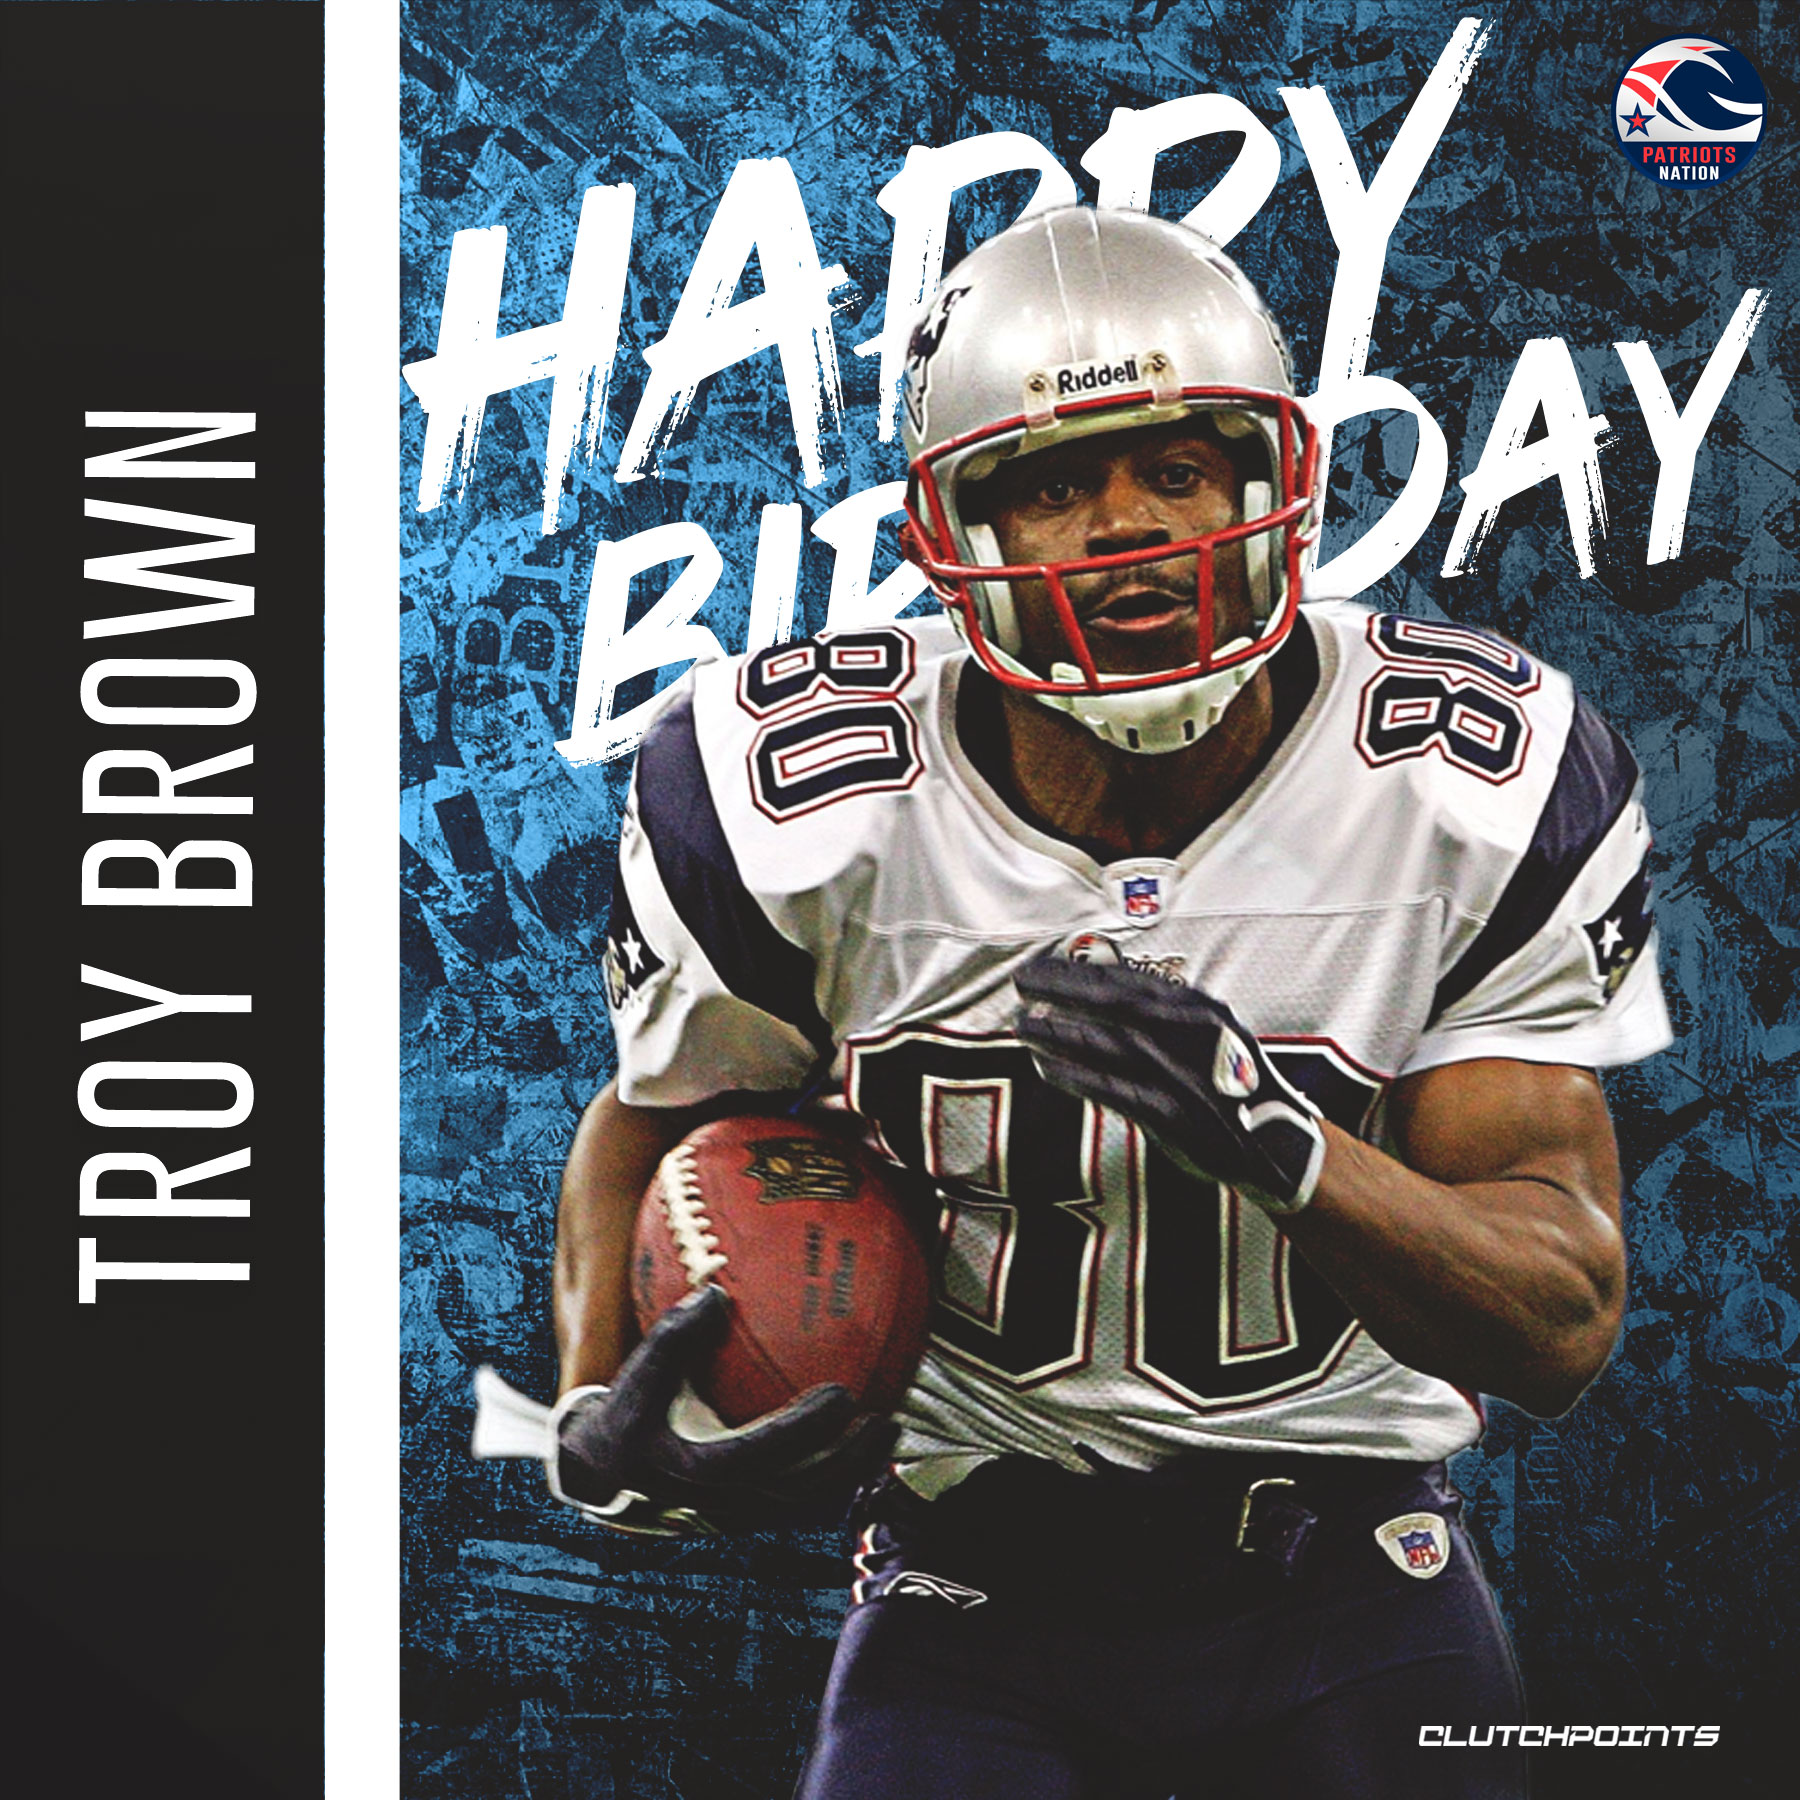 Let us all greet our 3-time Super Bowl Champion, Troy Brown a happy 50th birthday!  